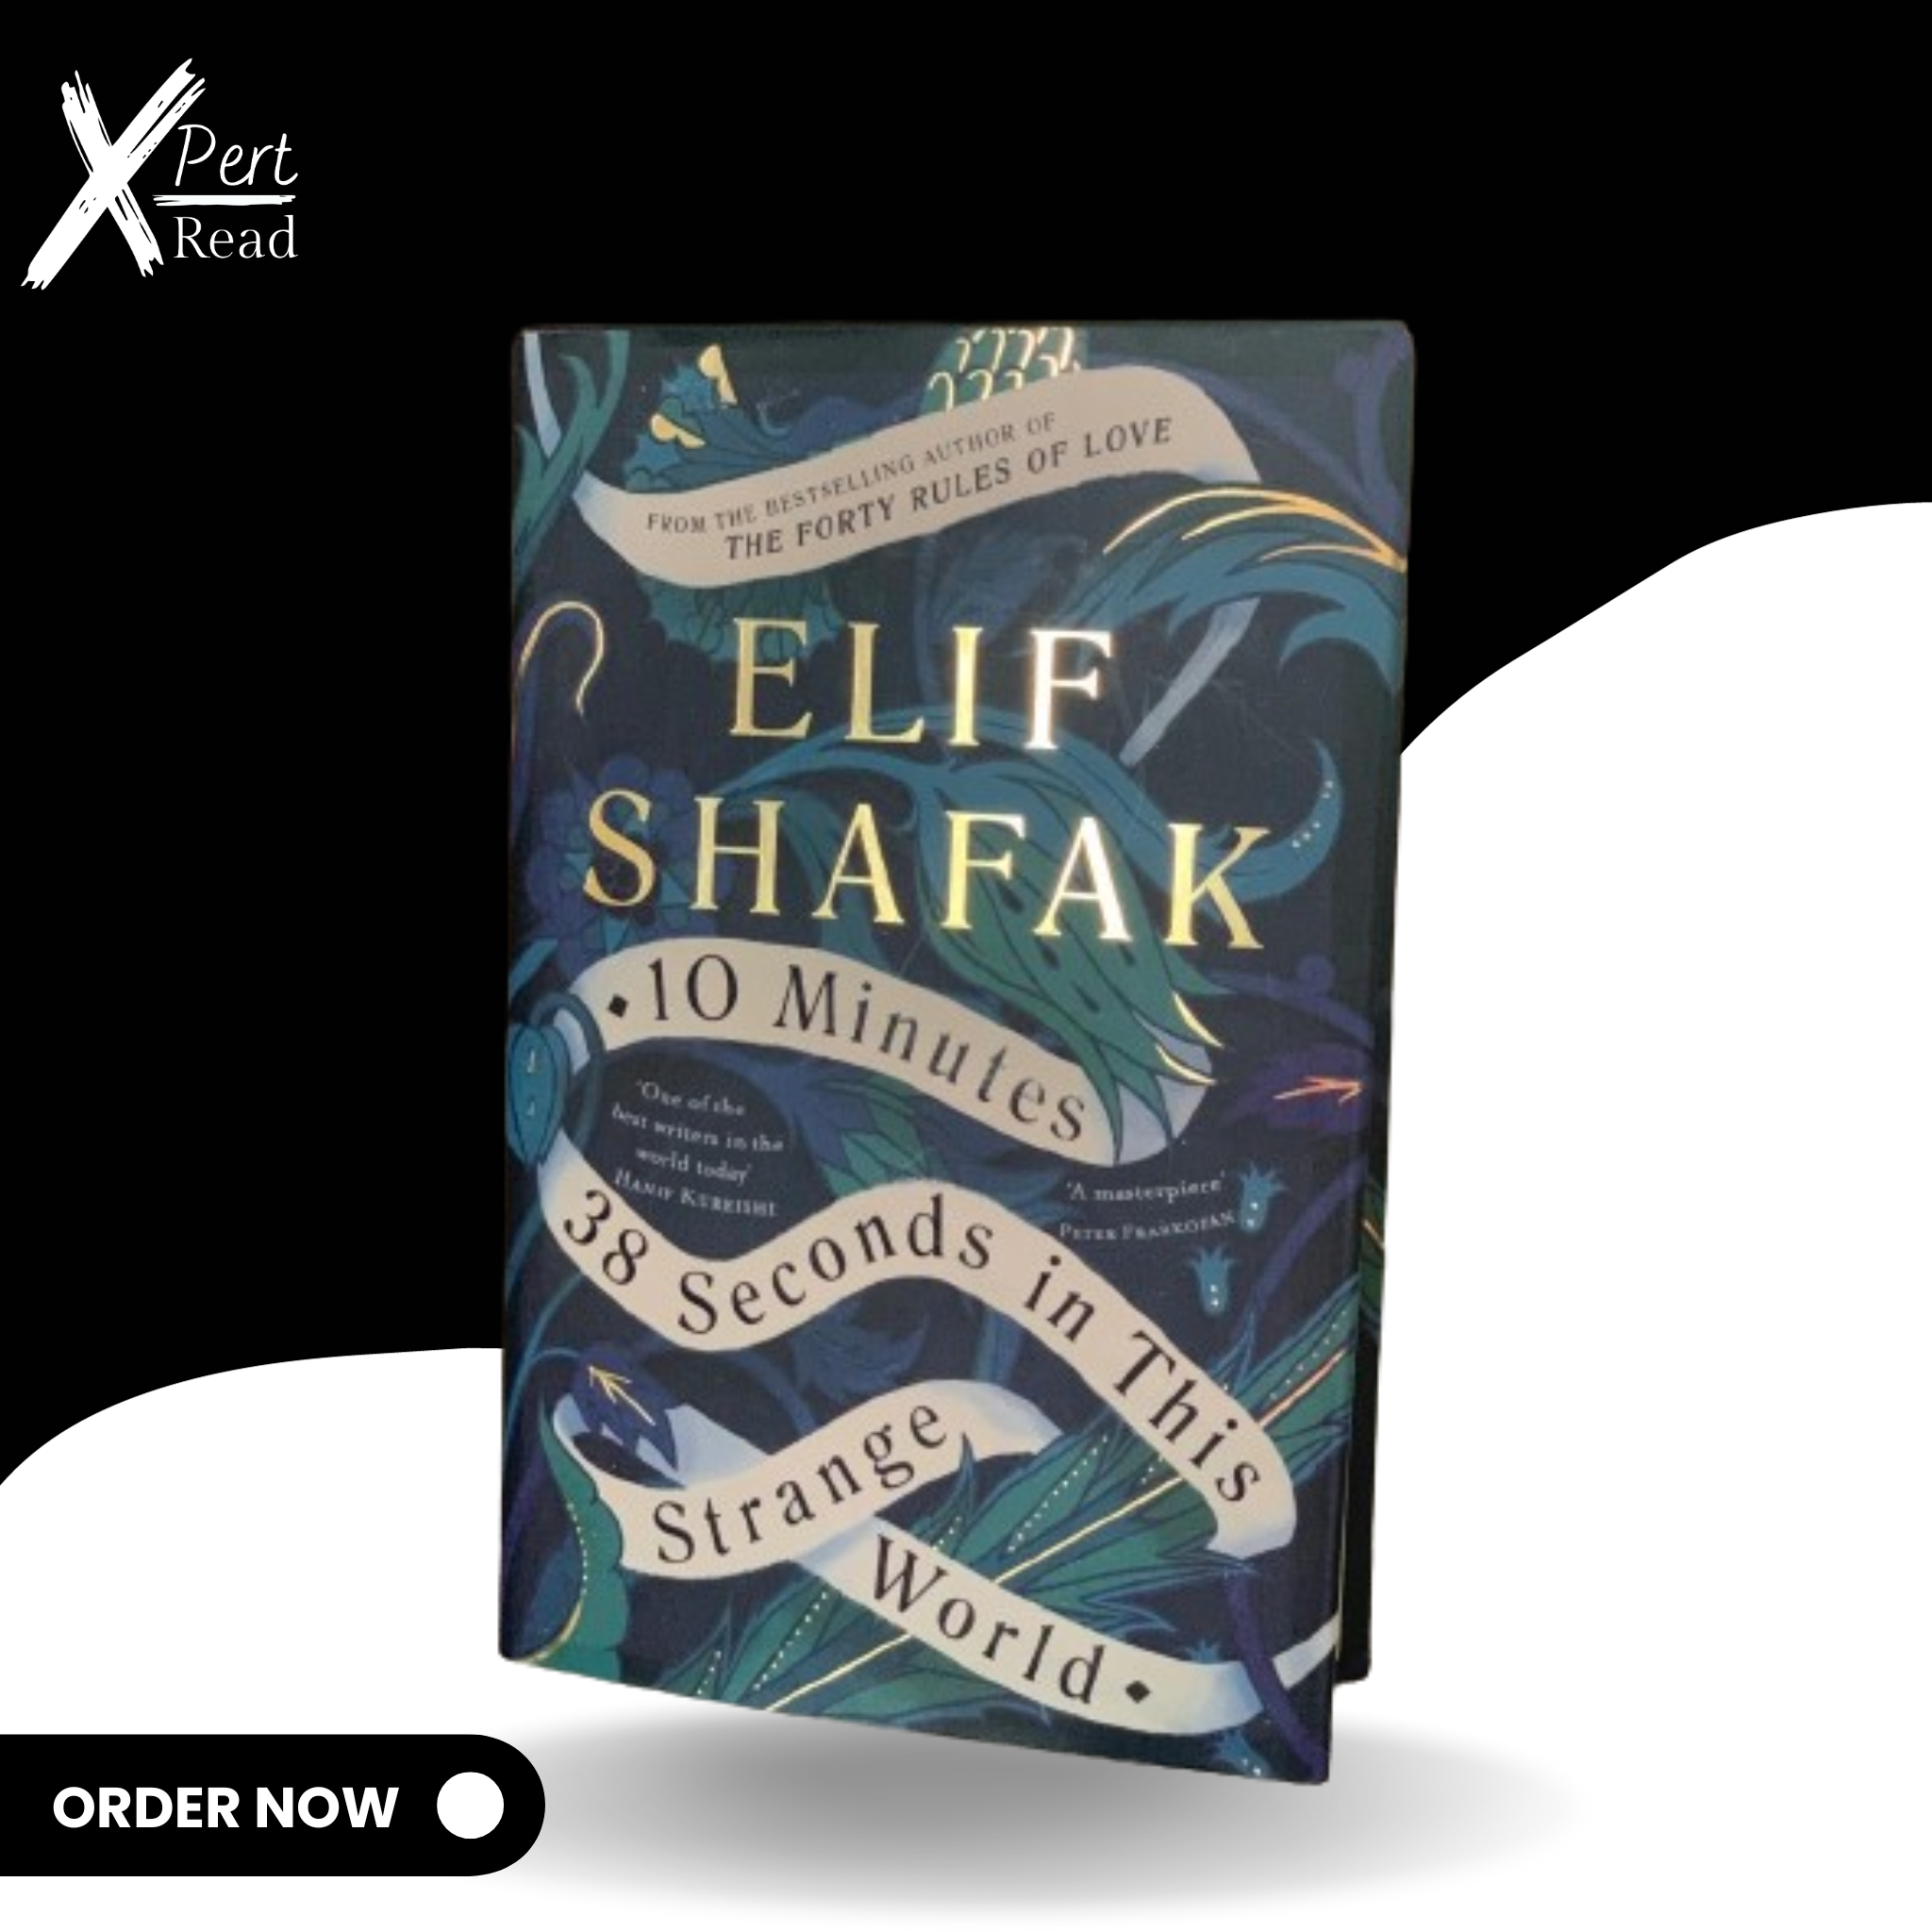 10 Minutes 38 Seconds In This Strange World By ELIF SHAFAK